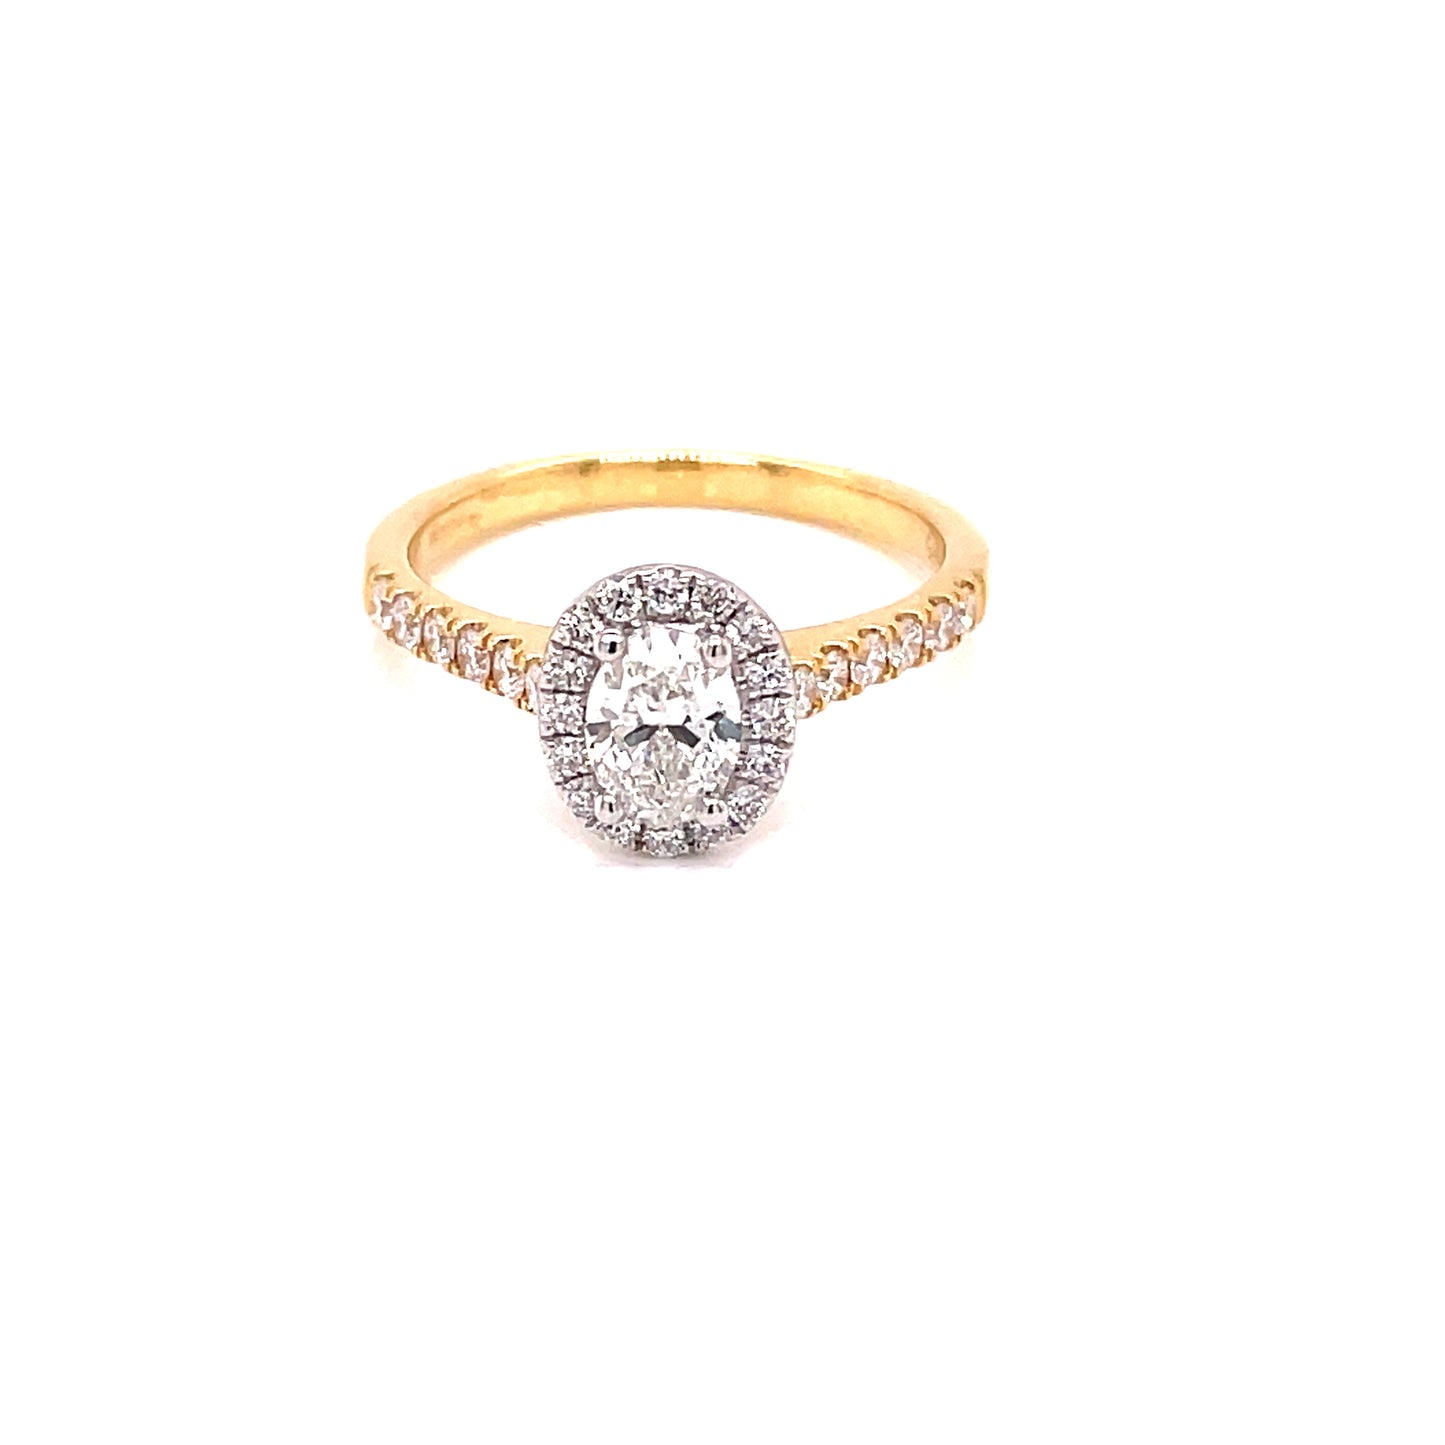 Oval Shaped Diamond Halo Style Ring - 1.07cts  Gardiner Brothers   